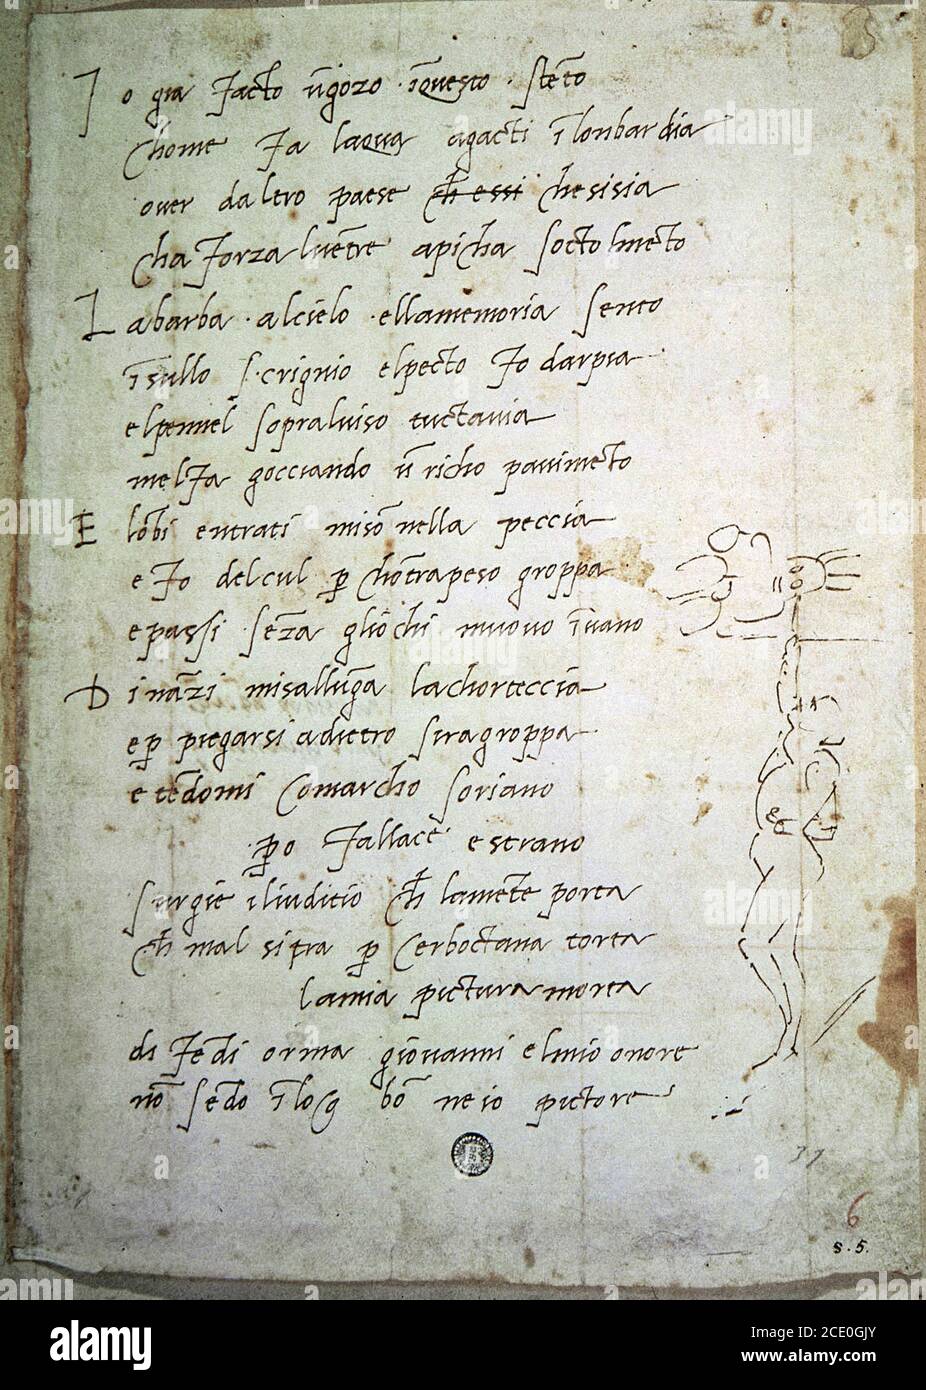 Michelangelo Buonarroti - A sonnet on the labors at the vault of the Sistine Chapel, copied in beautiful form and with an autographed sketch Stock Photo